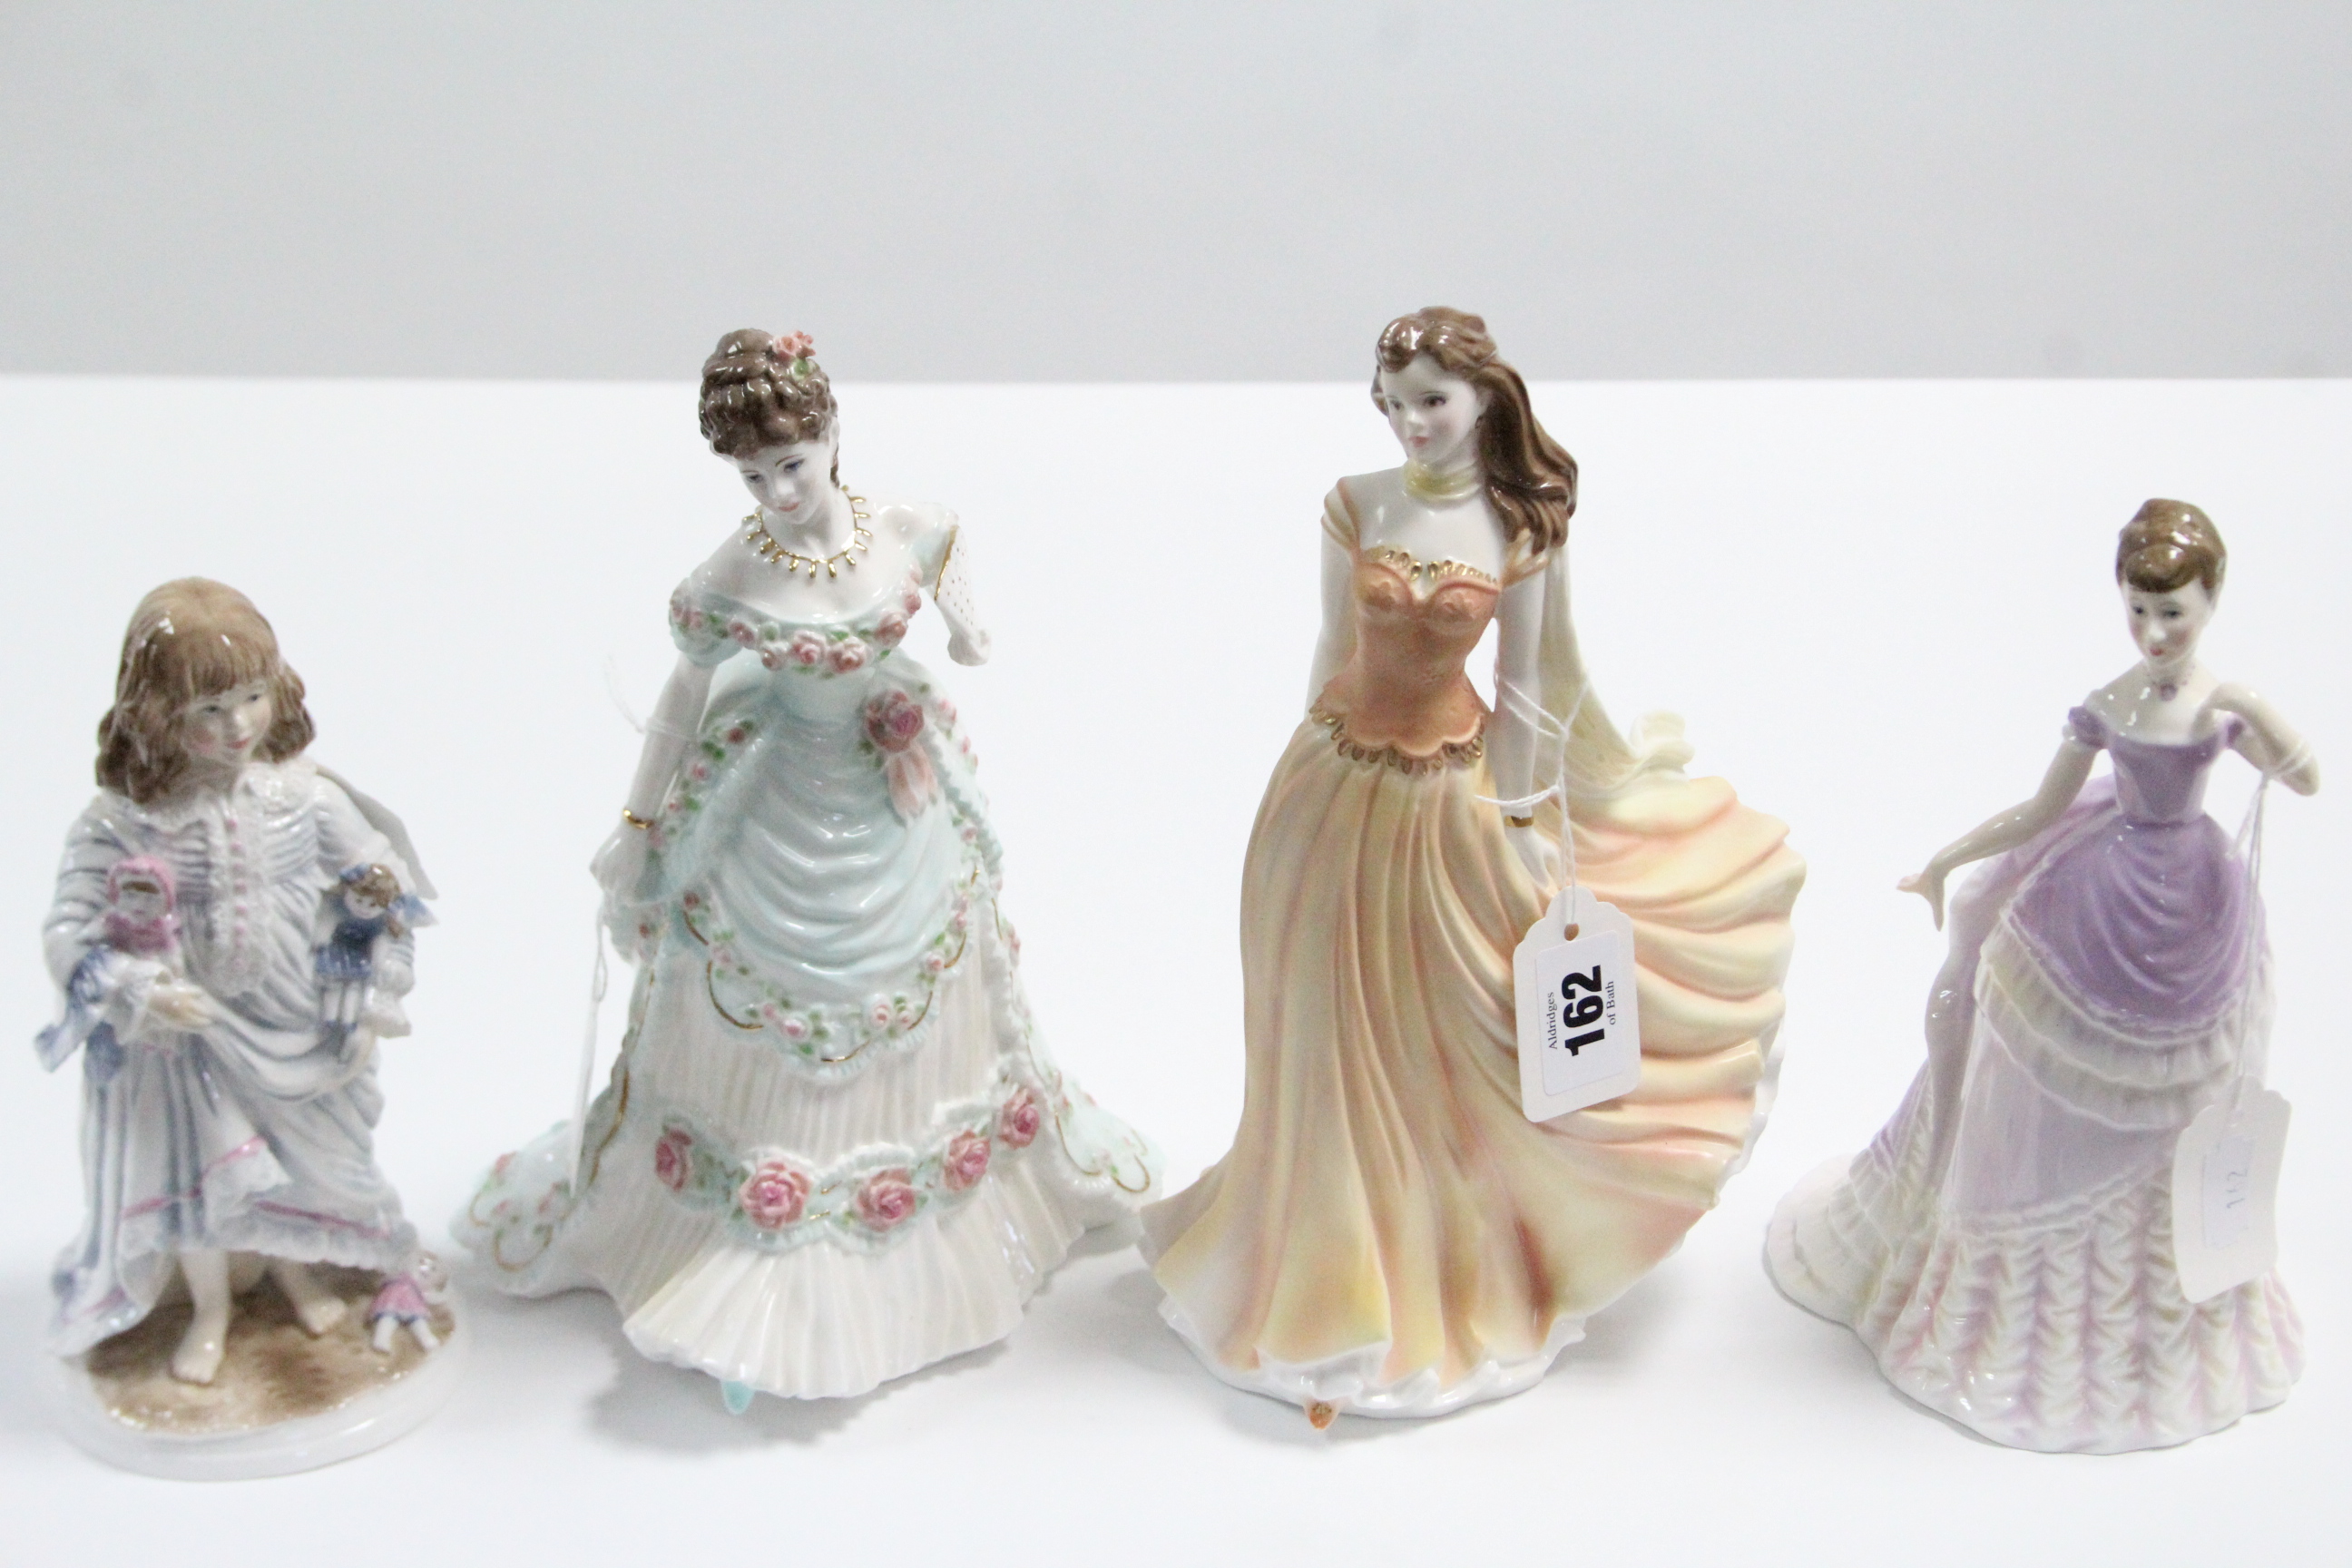 Four Royal Worcester bone china figures “A Royal Anniversary”, “Emily”, “Lullaby”, & “Wistful”.